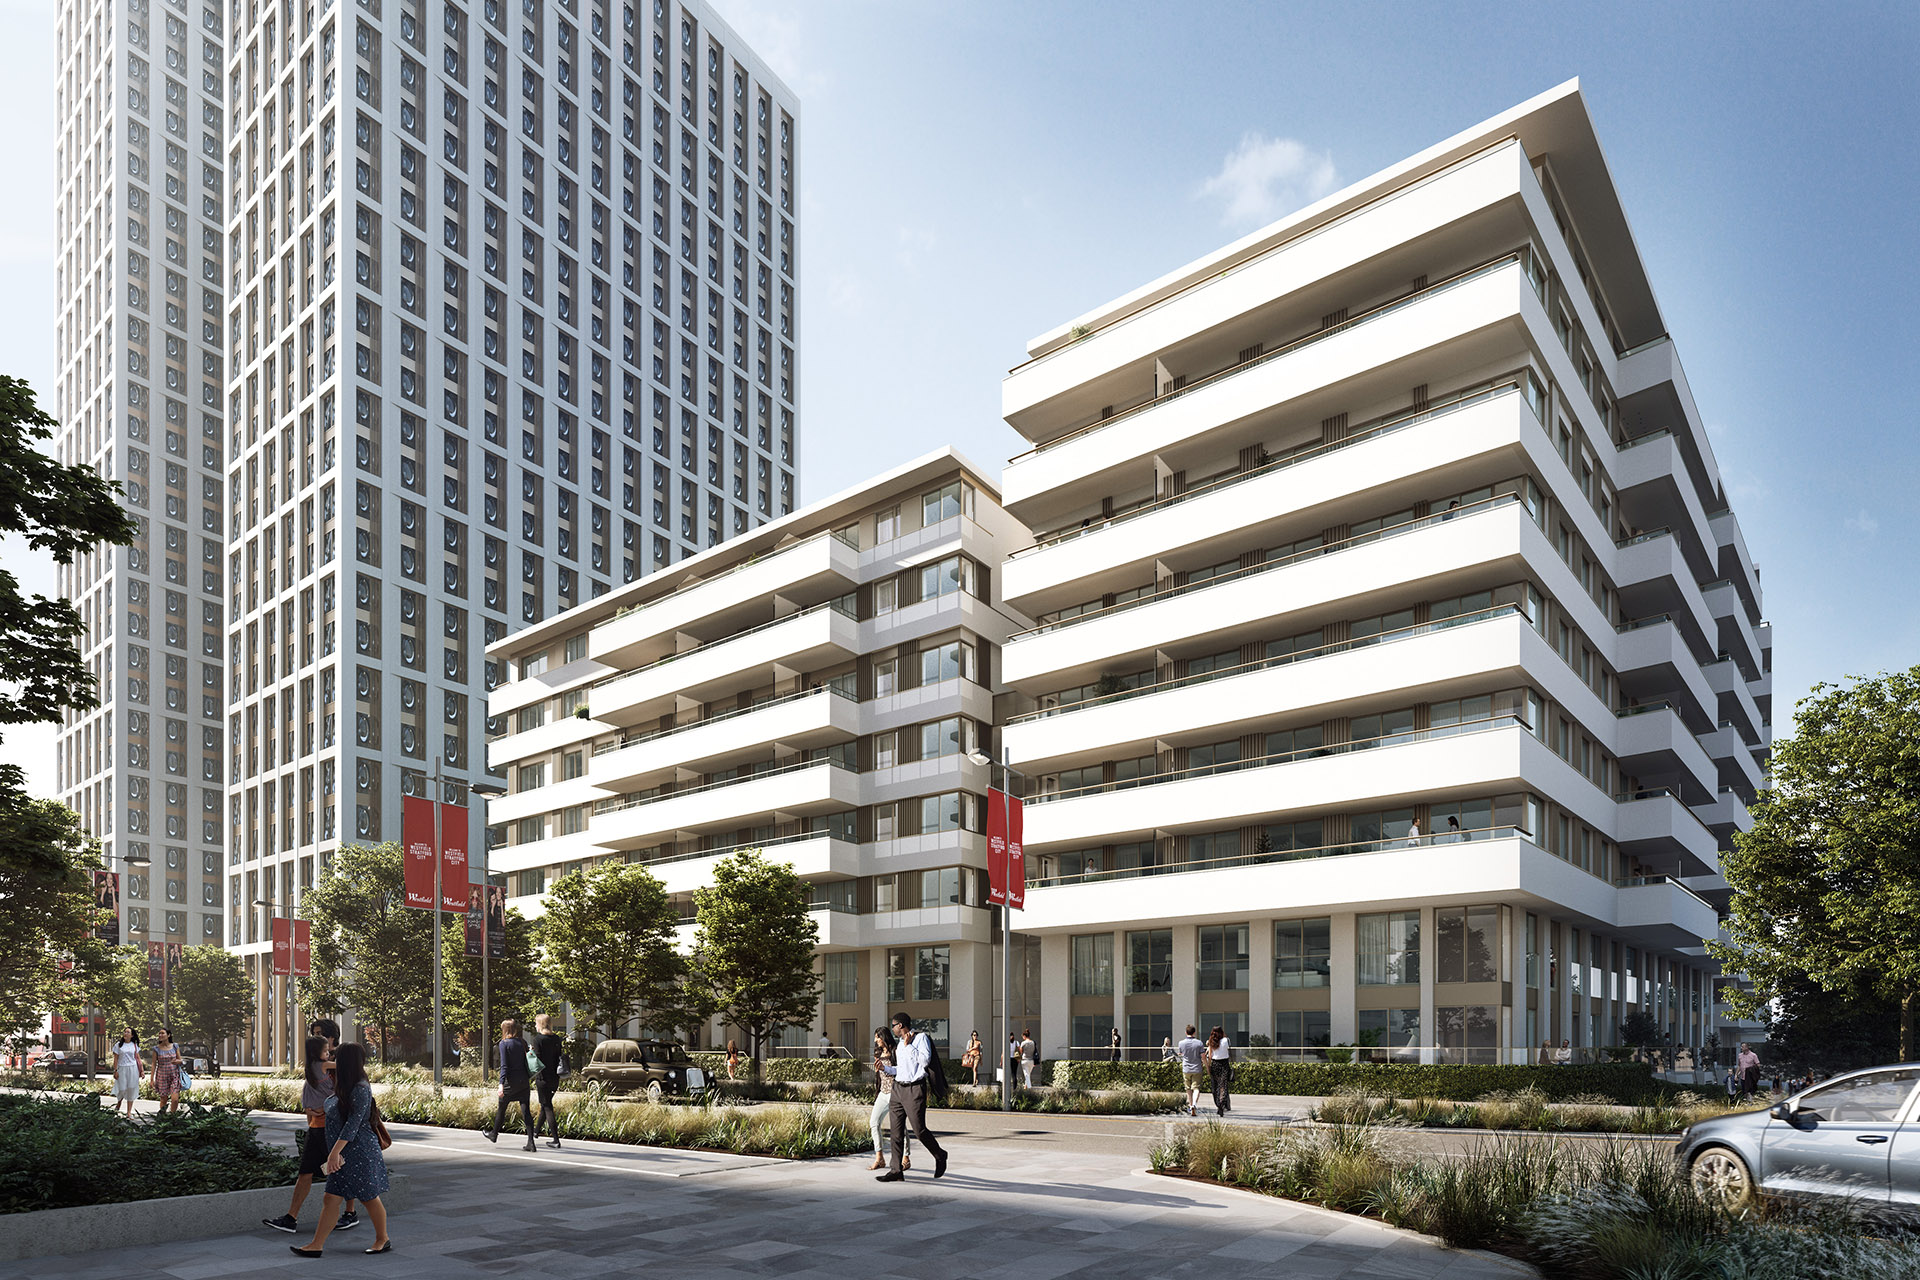 With the supply of over 11,000 m² of façade to residential block B of the Cherry Park project, Sipral continues to co-create a new metropolitan centre for North East London. Sipral is following its work on Block A, for which it also supplies façade.